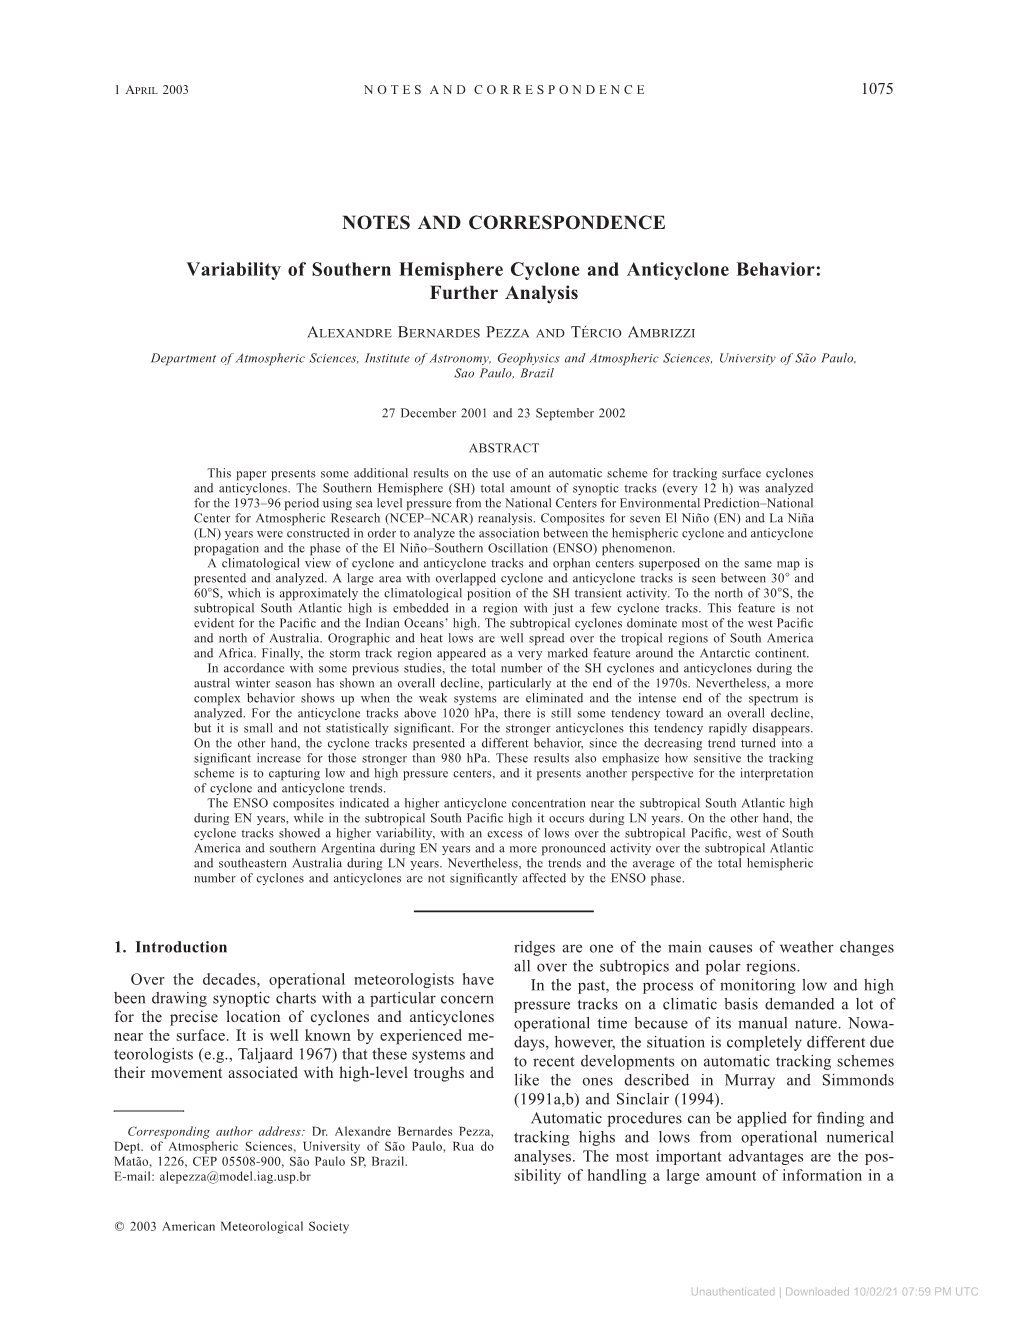 NOTES and CORRESPONDENCE Variability of Southern Hemisphere Cyclone and Anticyclone Behavior: Further Analysis